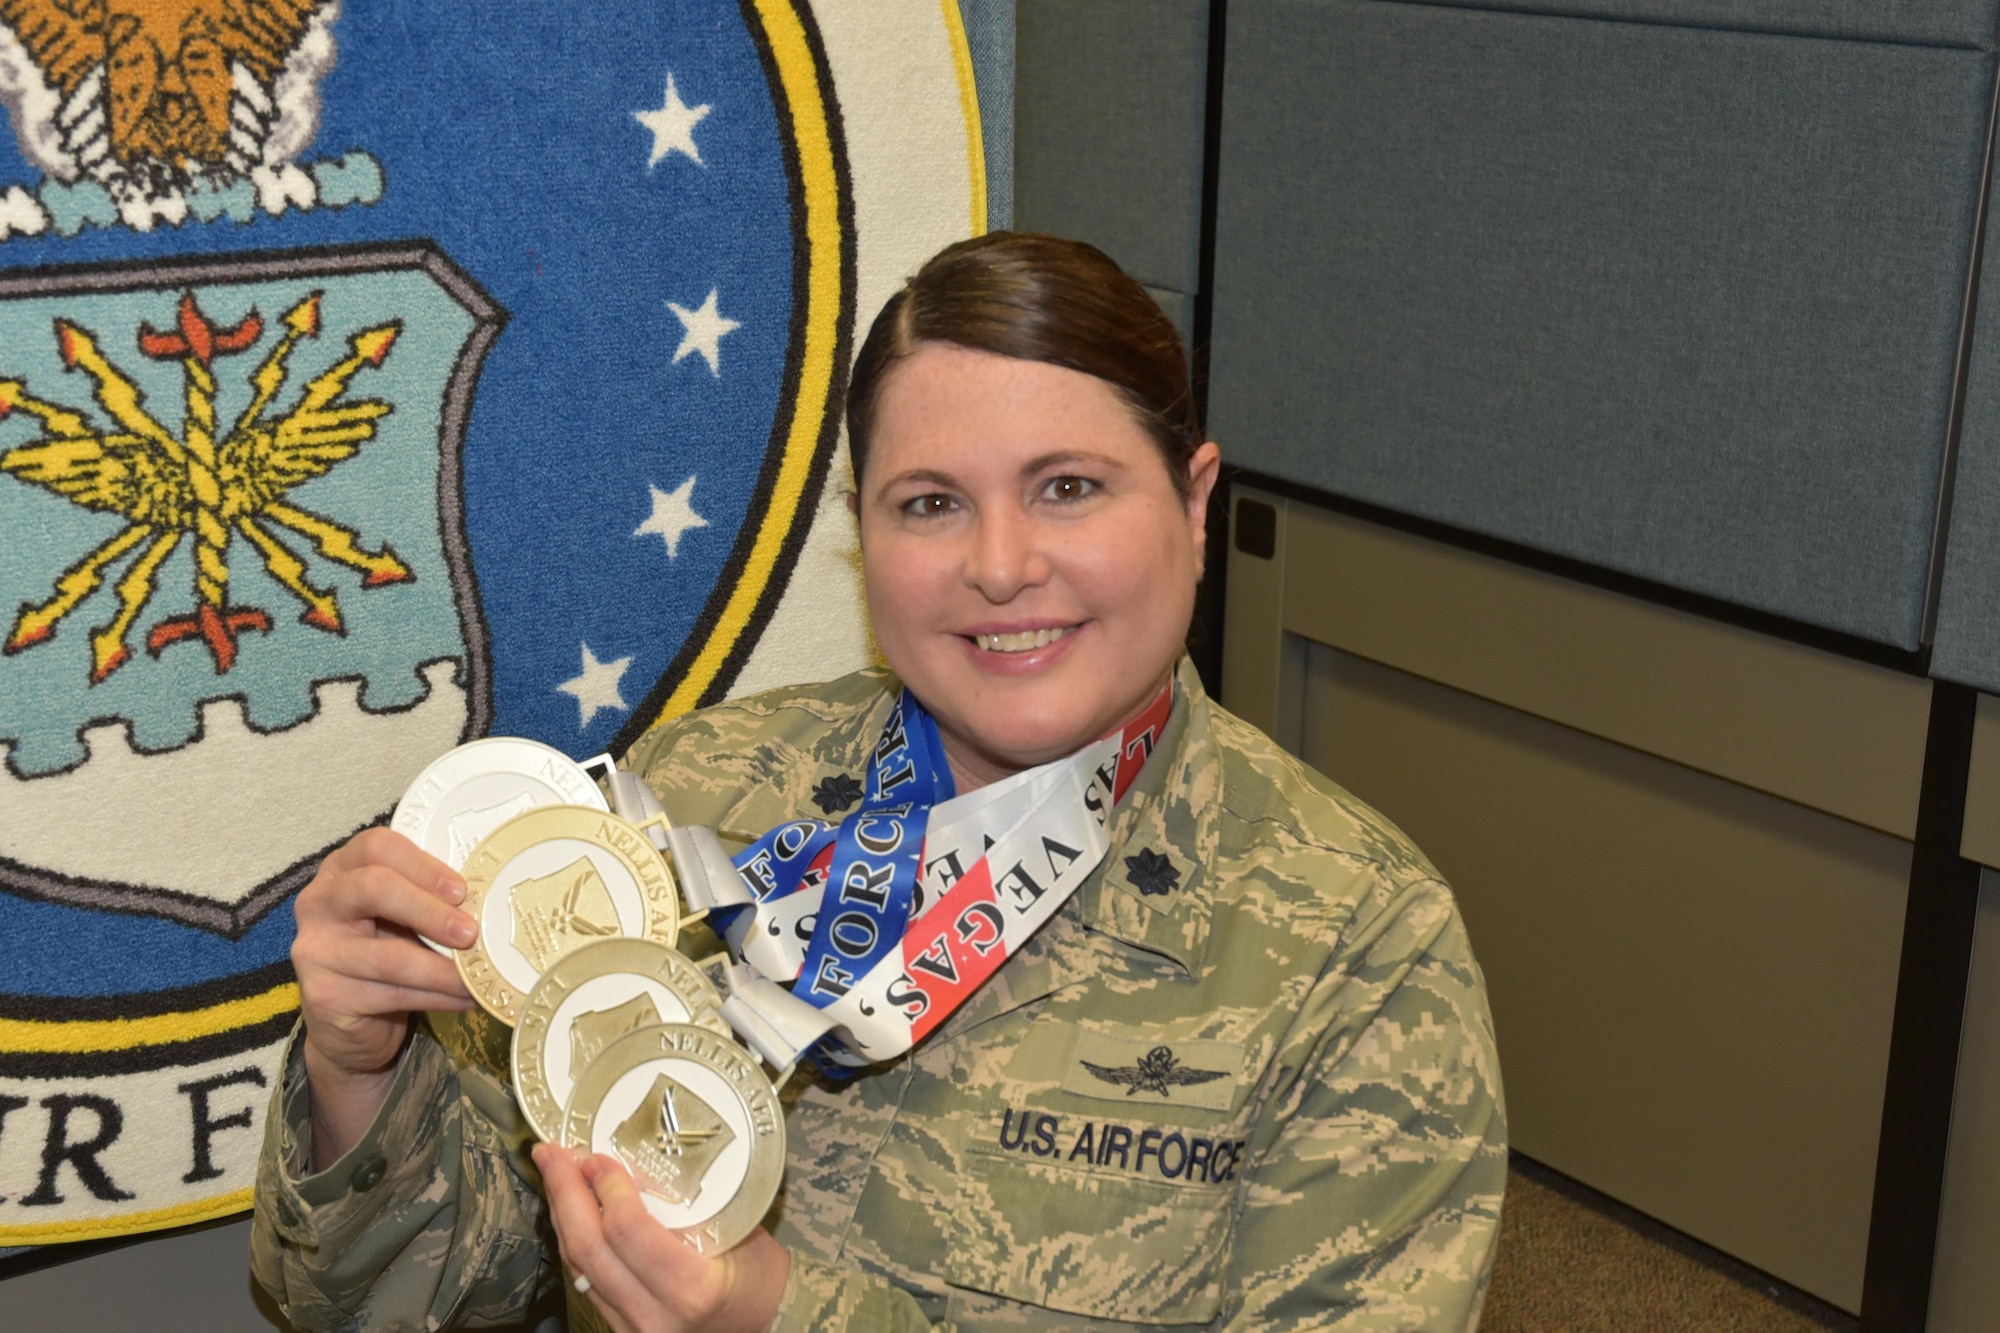 Lt. Col. Jackie Burns, 552nd Air control Group, 552nd Air Control Wing, displays the medals she earned at the Wounded Warrior Trials at Nellis Air force Base, Nev. Feb. 17. Burns had Silvers in 5K Cycling, 100-meter Free Style, Discus and a Bronze Medal in the 50-meter BackStroke.  Burns was selected as a primary Wounded Warrior team member and will compete in the Warrior Games June 30-July 8 in Chicago.  (Air Force photo by Ron Mullan)